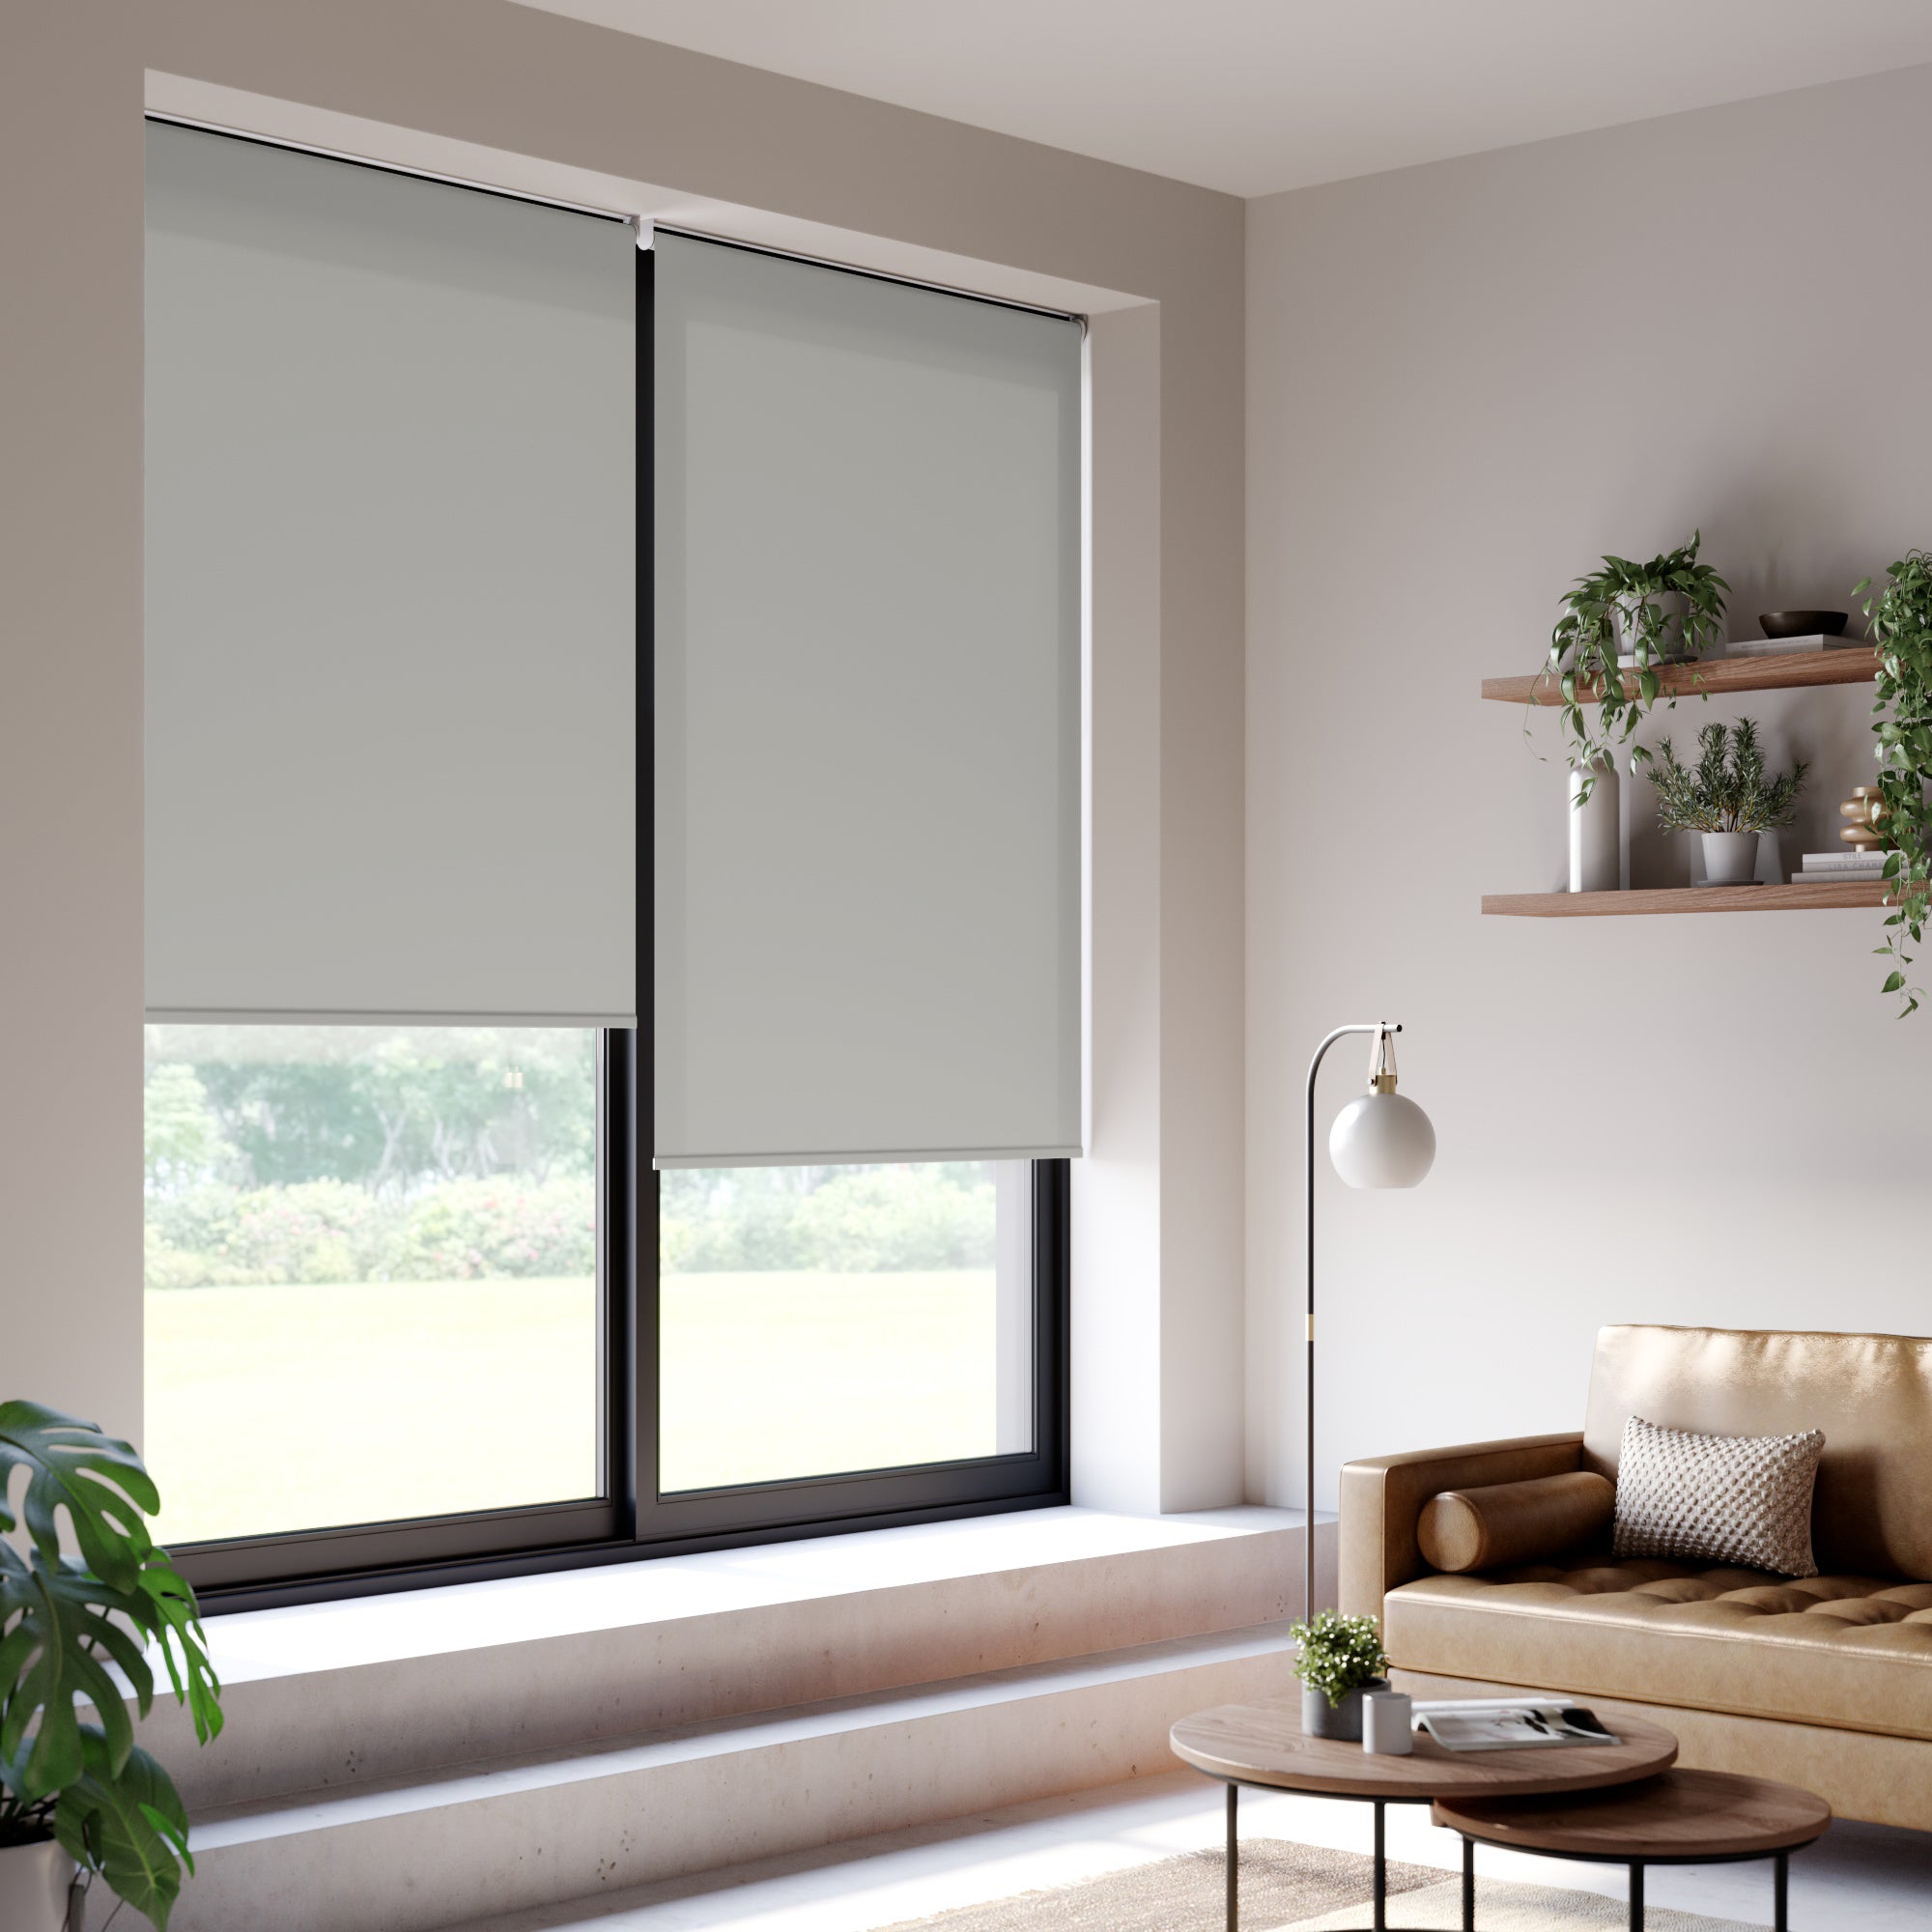 Twilight Daylight Made to Measure Roller Blind Twilight Silver